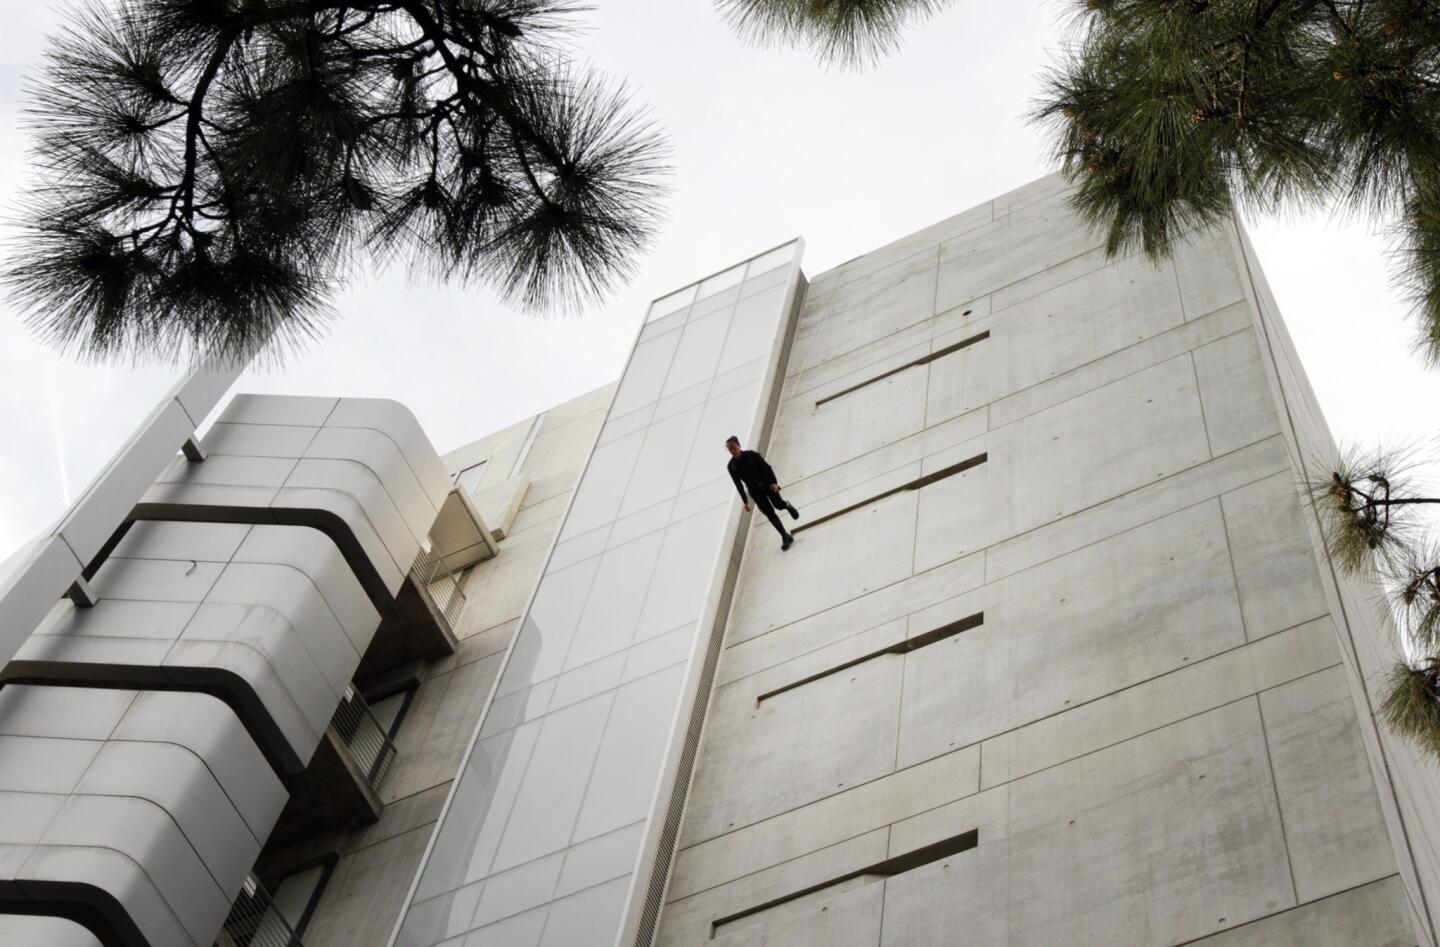 'Man Walking Down the Side of a Building'